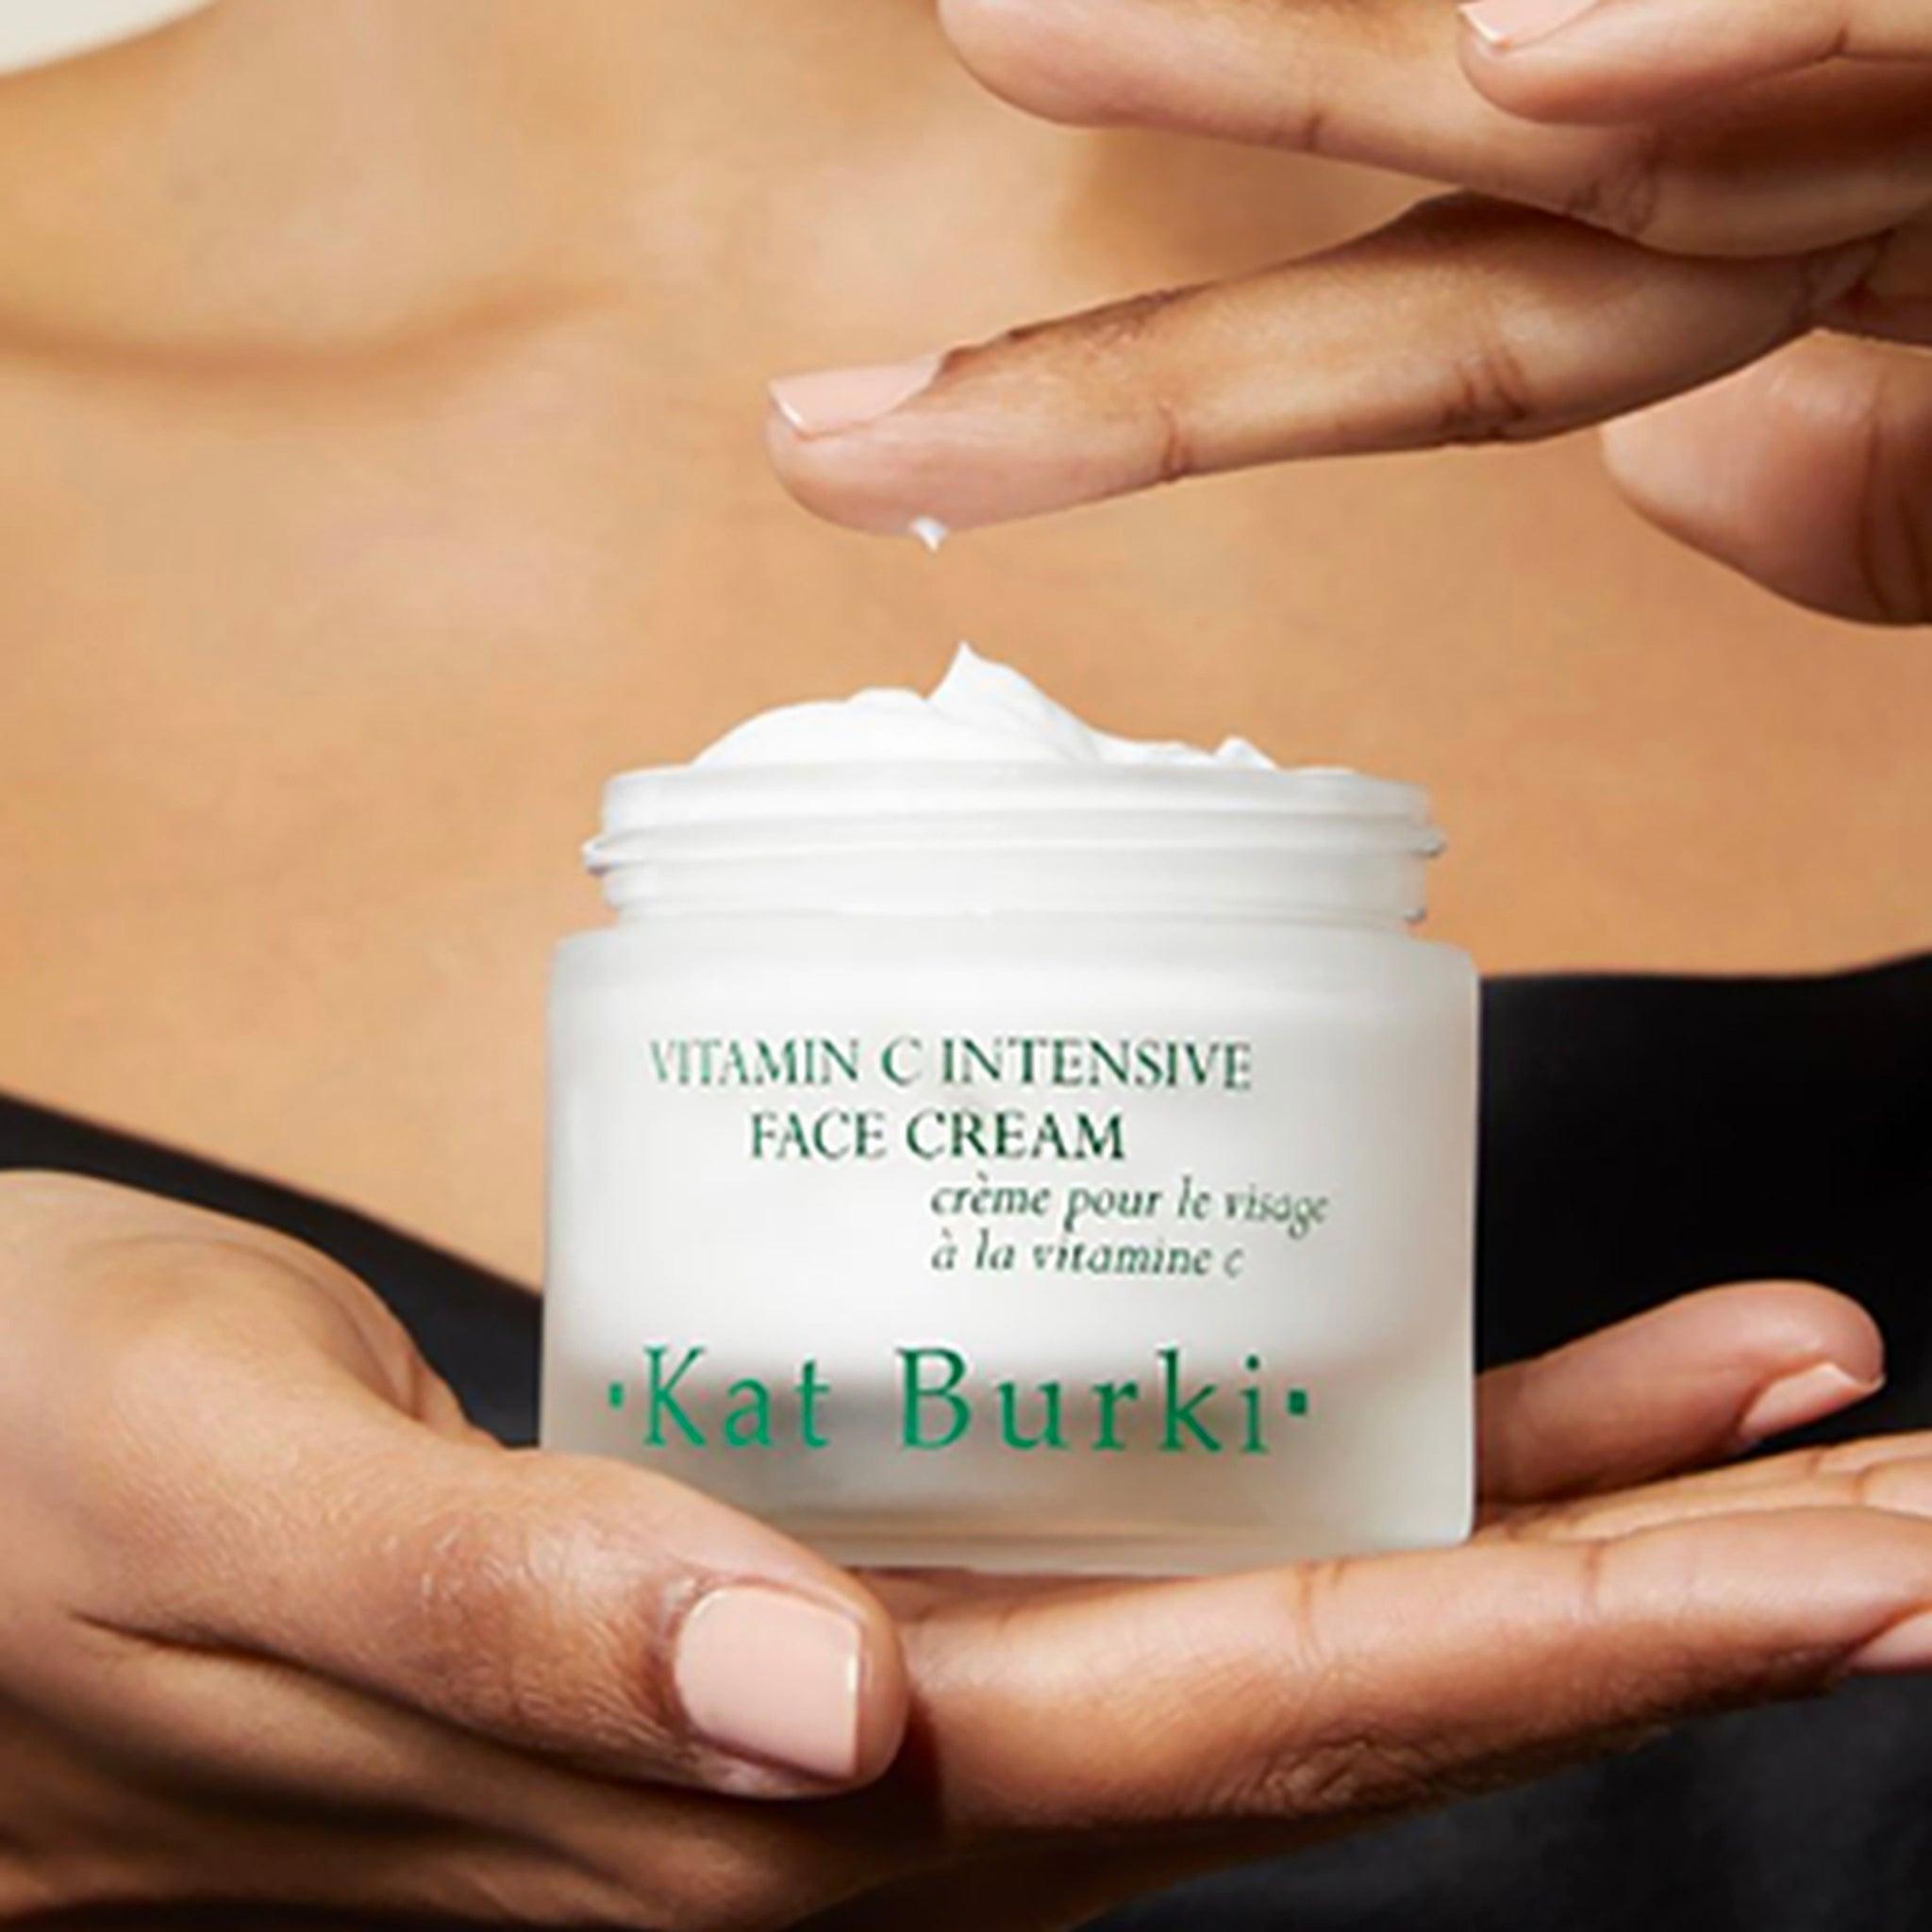 A womans hand holding a jar of Vitamin C Intensive Face Cream by Kat Burki.